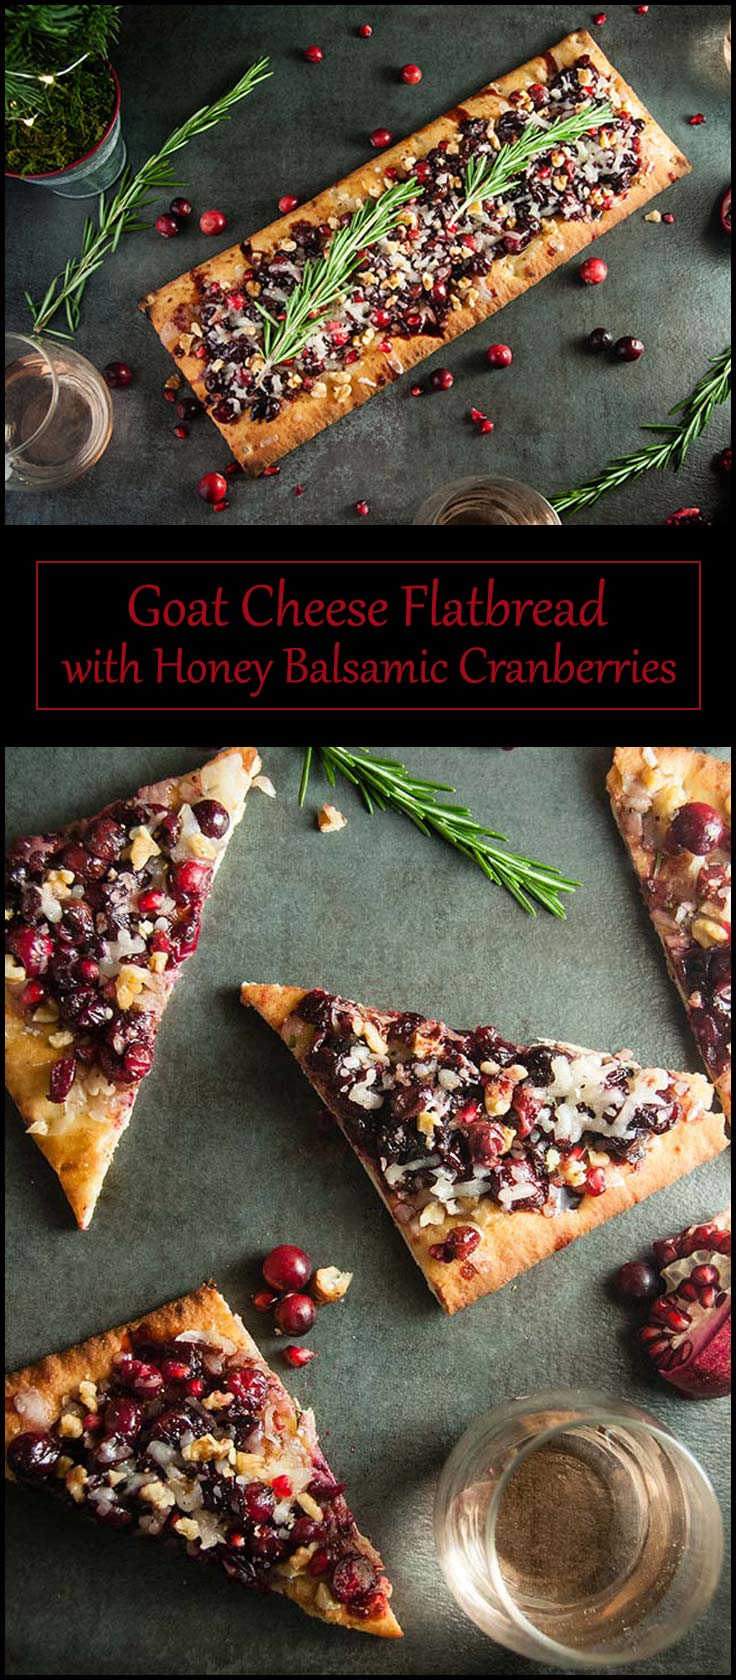 Holiday Goat Cheese Flatbread with Honey Balsamic Cranberries and Pomegranate from www.seasonedsprinkles.com